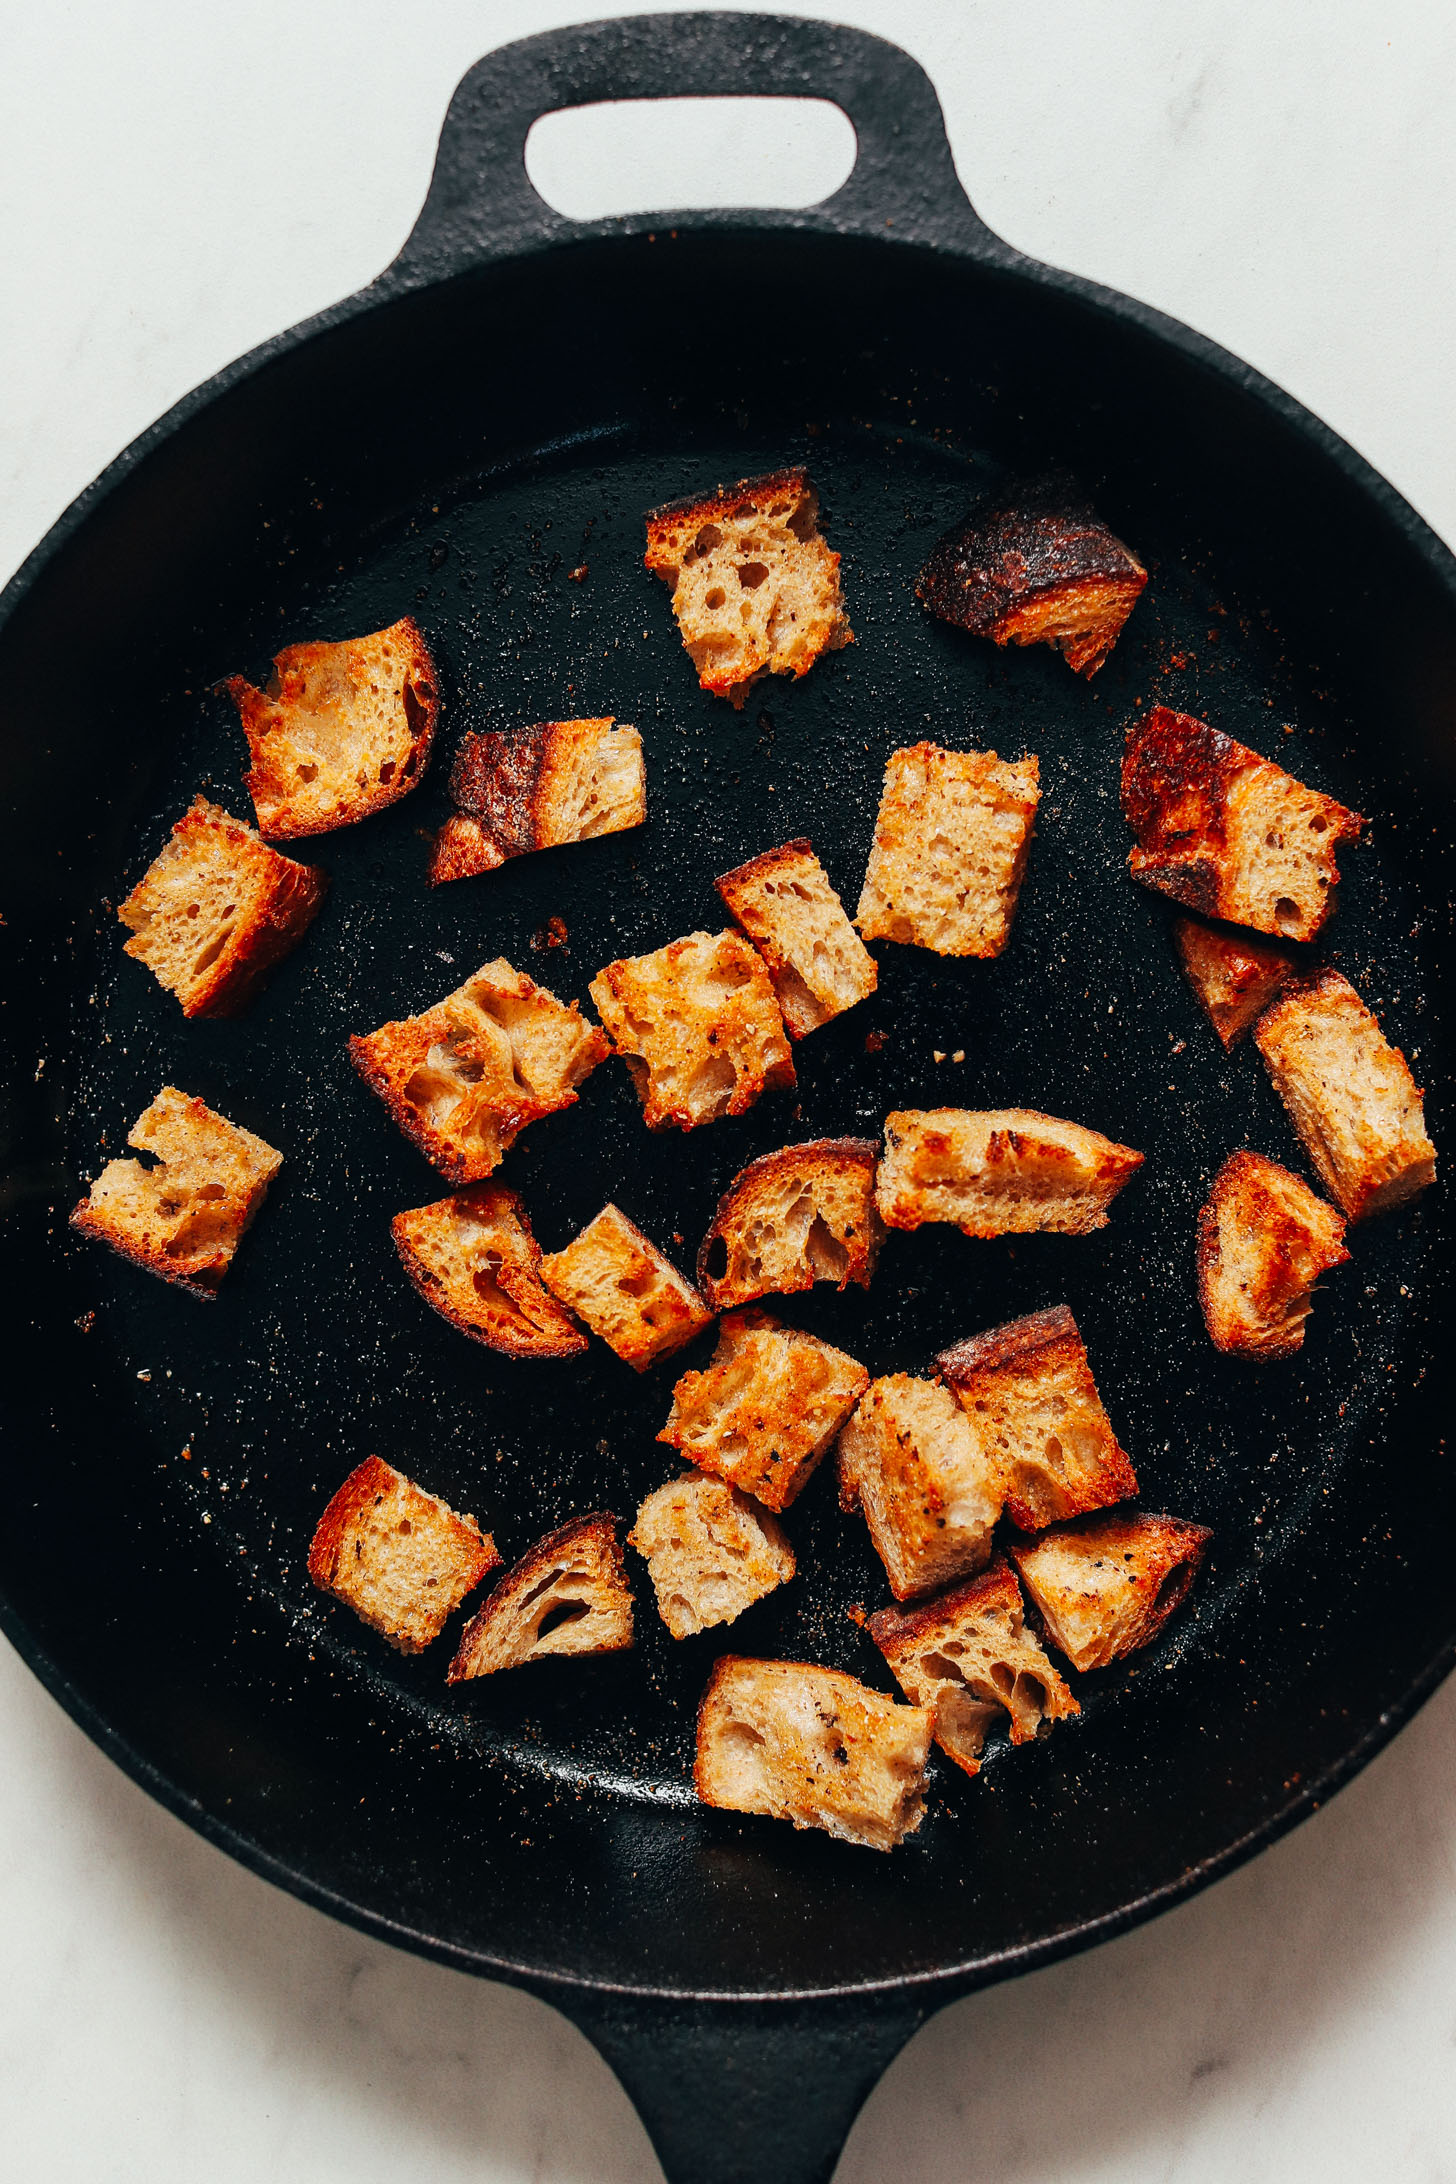 Homemade croutons in a cast iron skillet